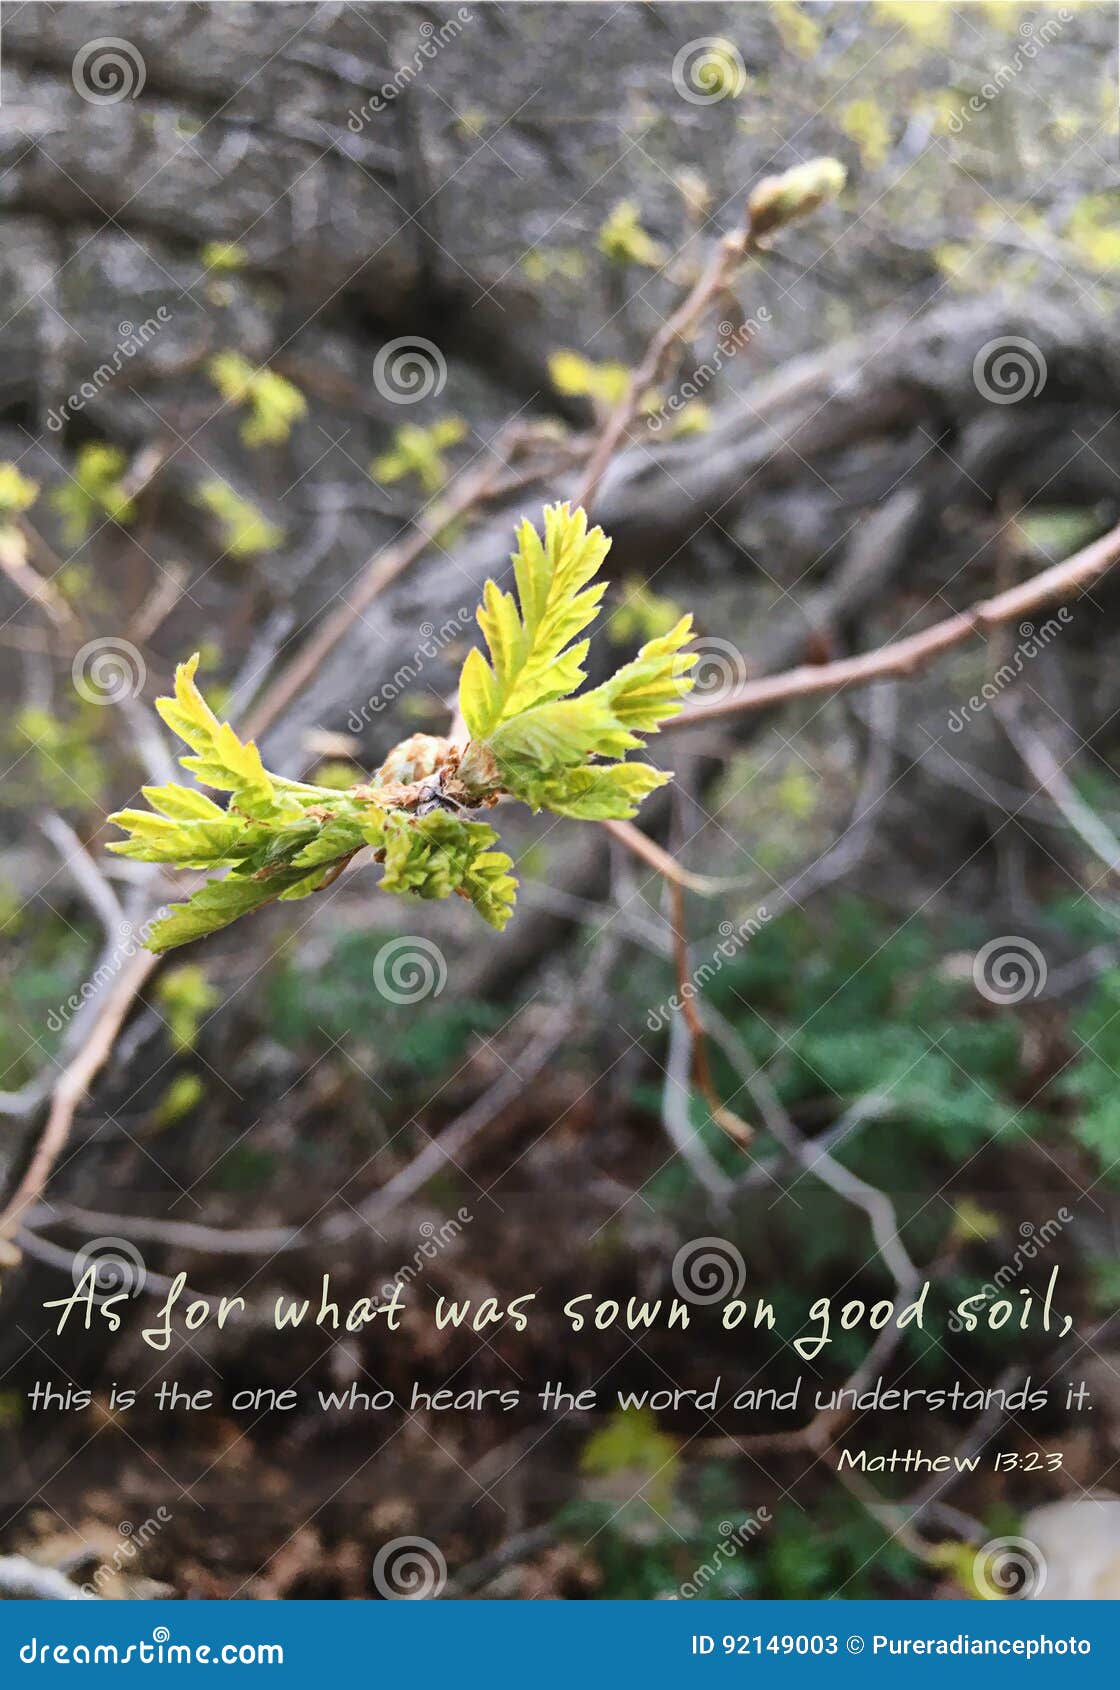 Flower in bud and matthew passage. Christian matthew 12 bible parable about a seed growing in the ground with good soil or thorny soil